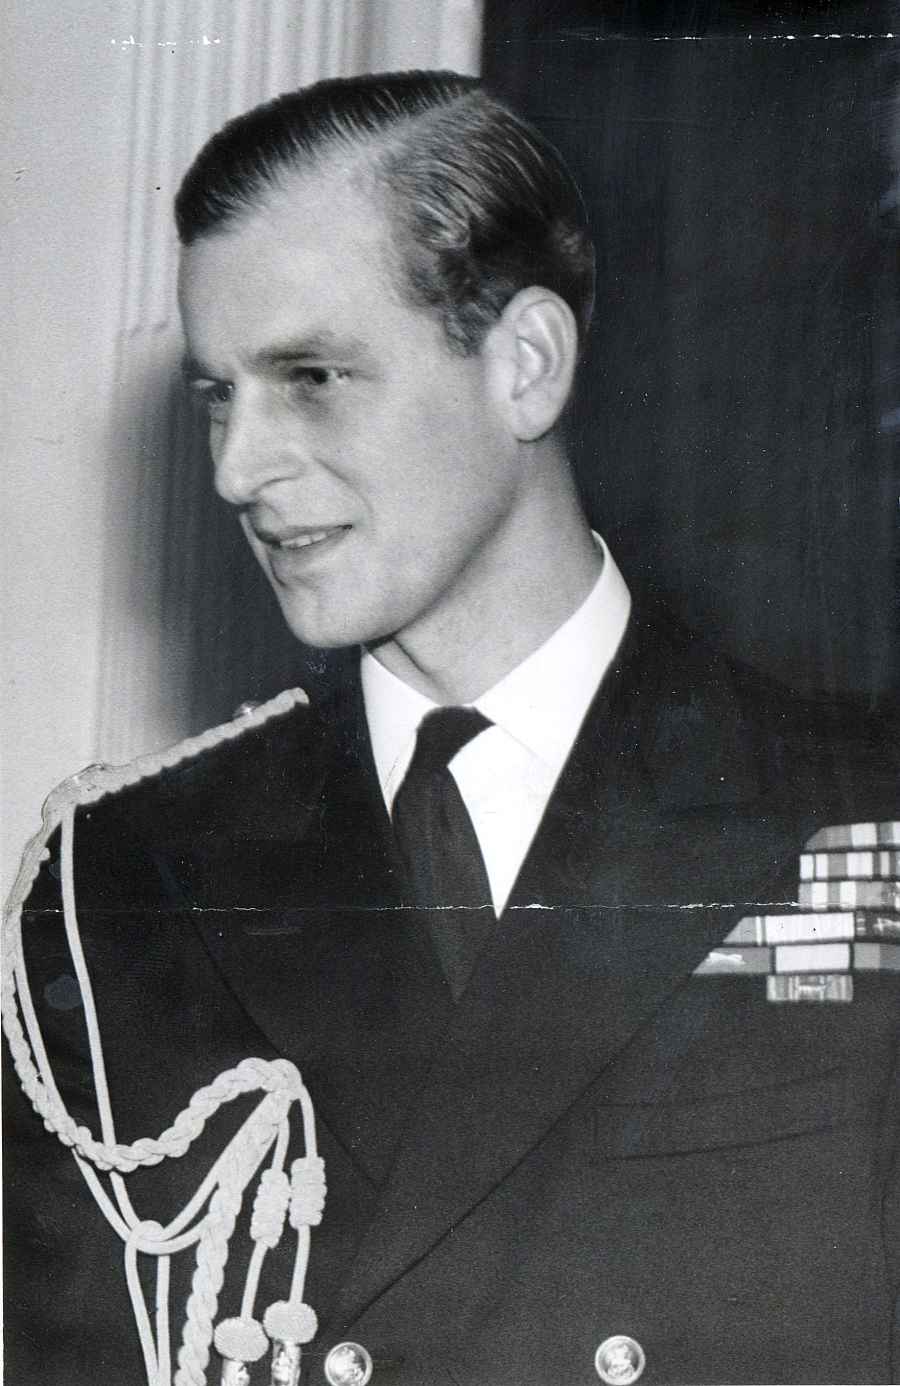 Prince Philip Through the Years